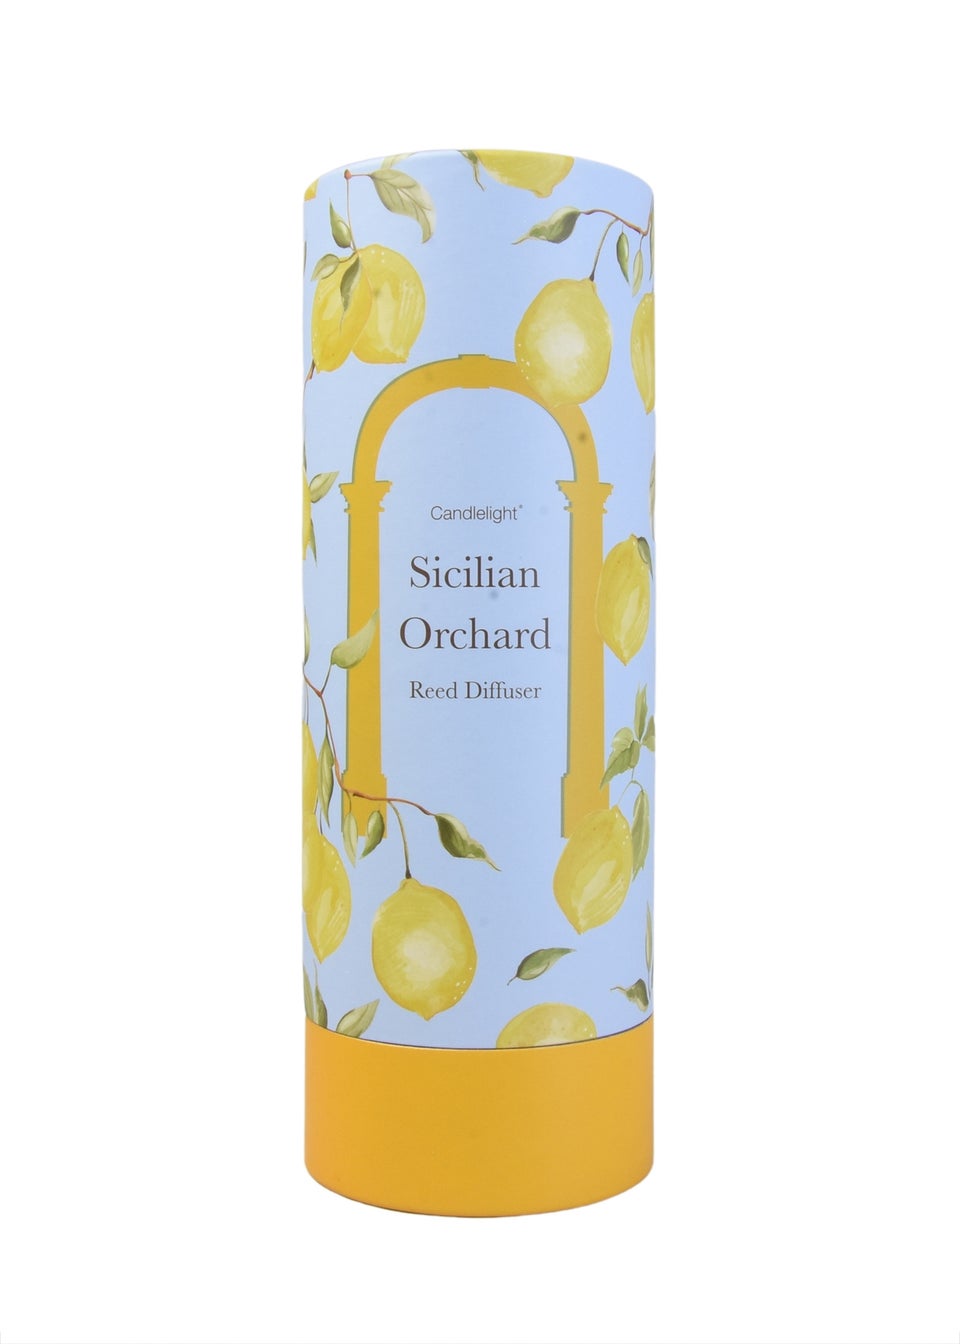 Candlelight Sicilian Orchard Reed Diffuser (150ml)